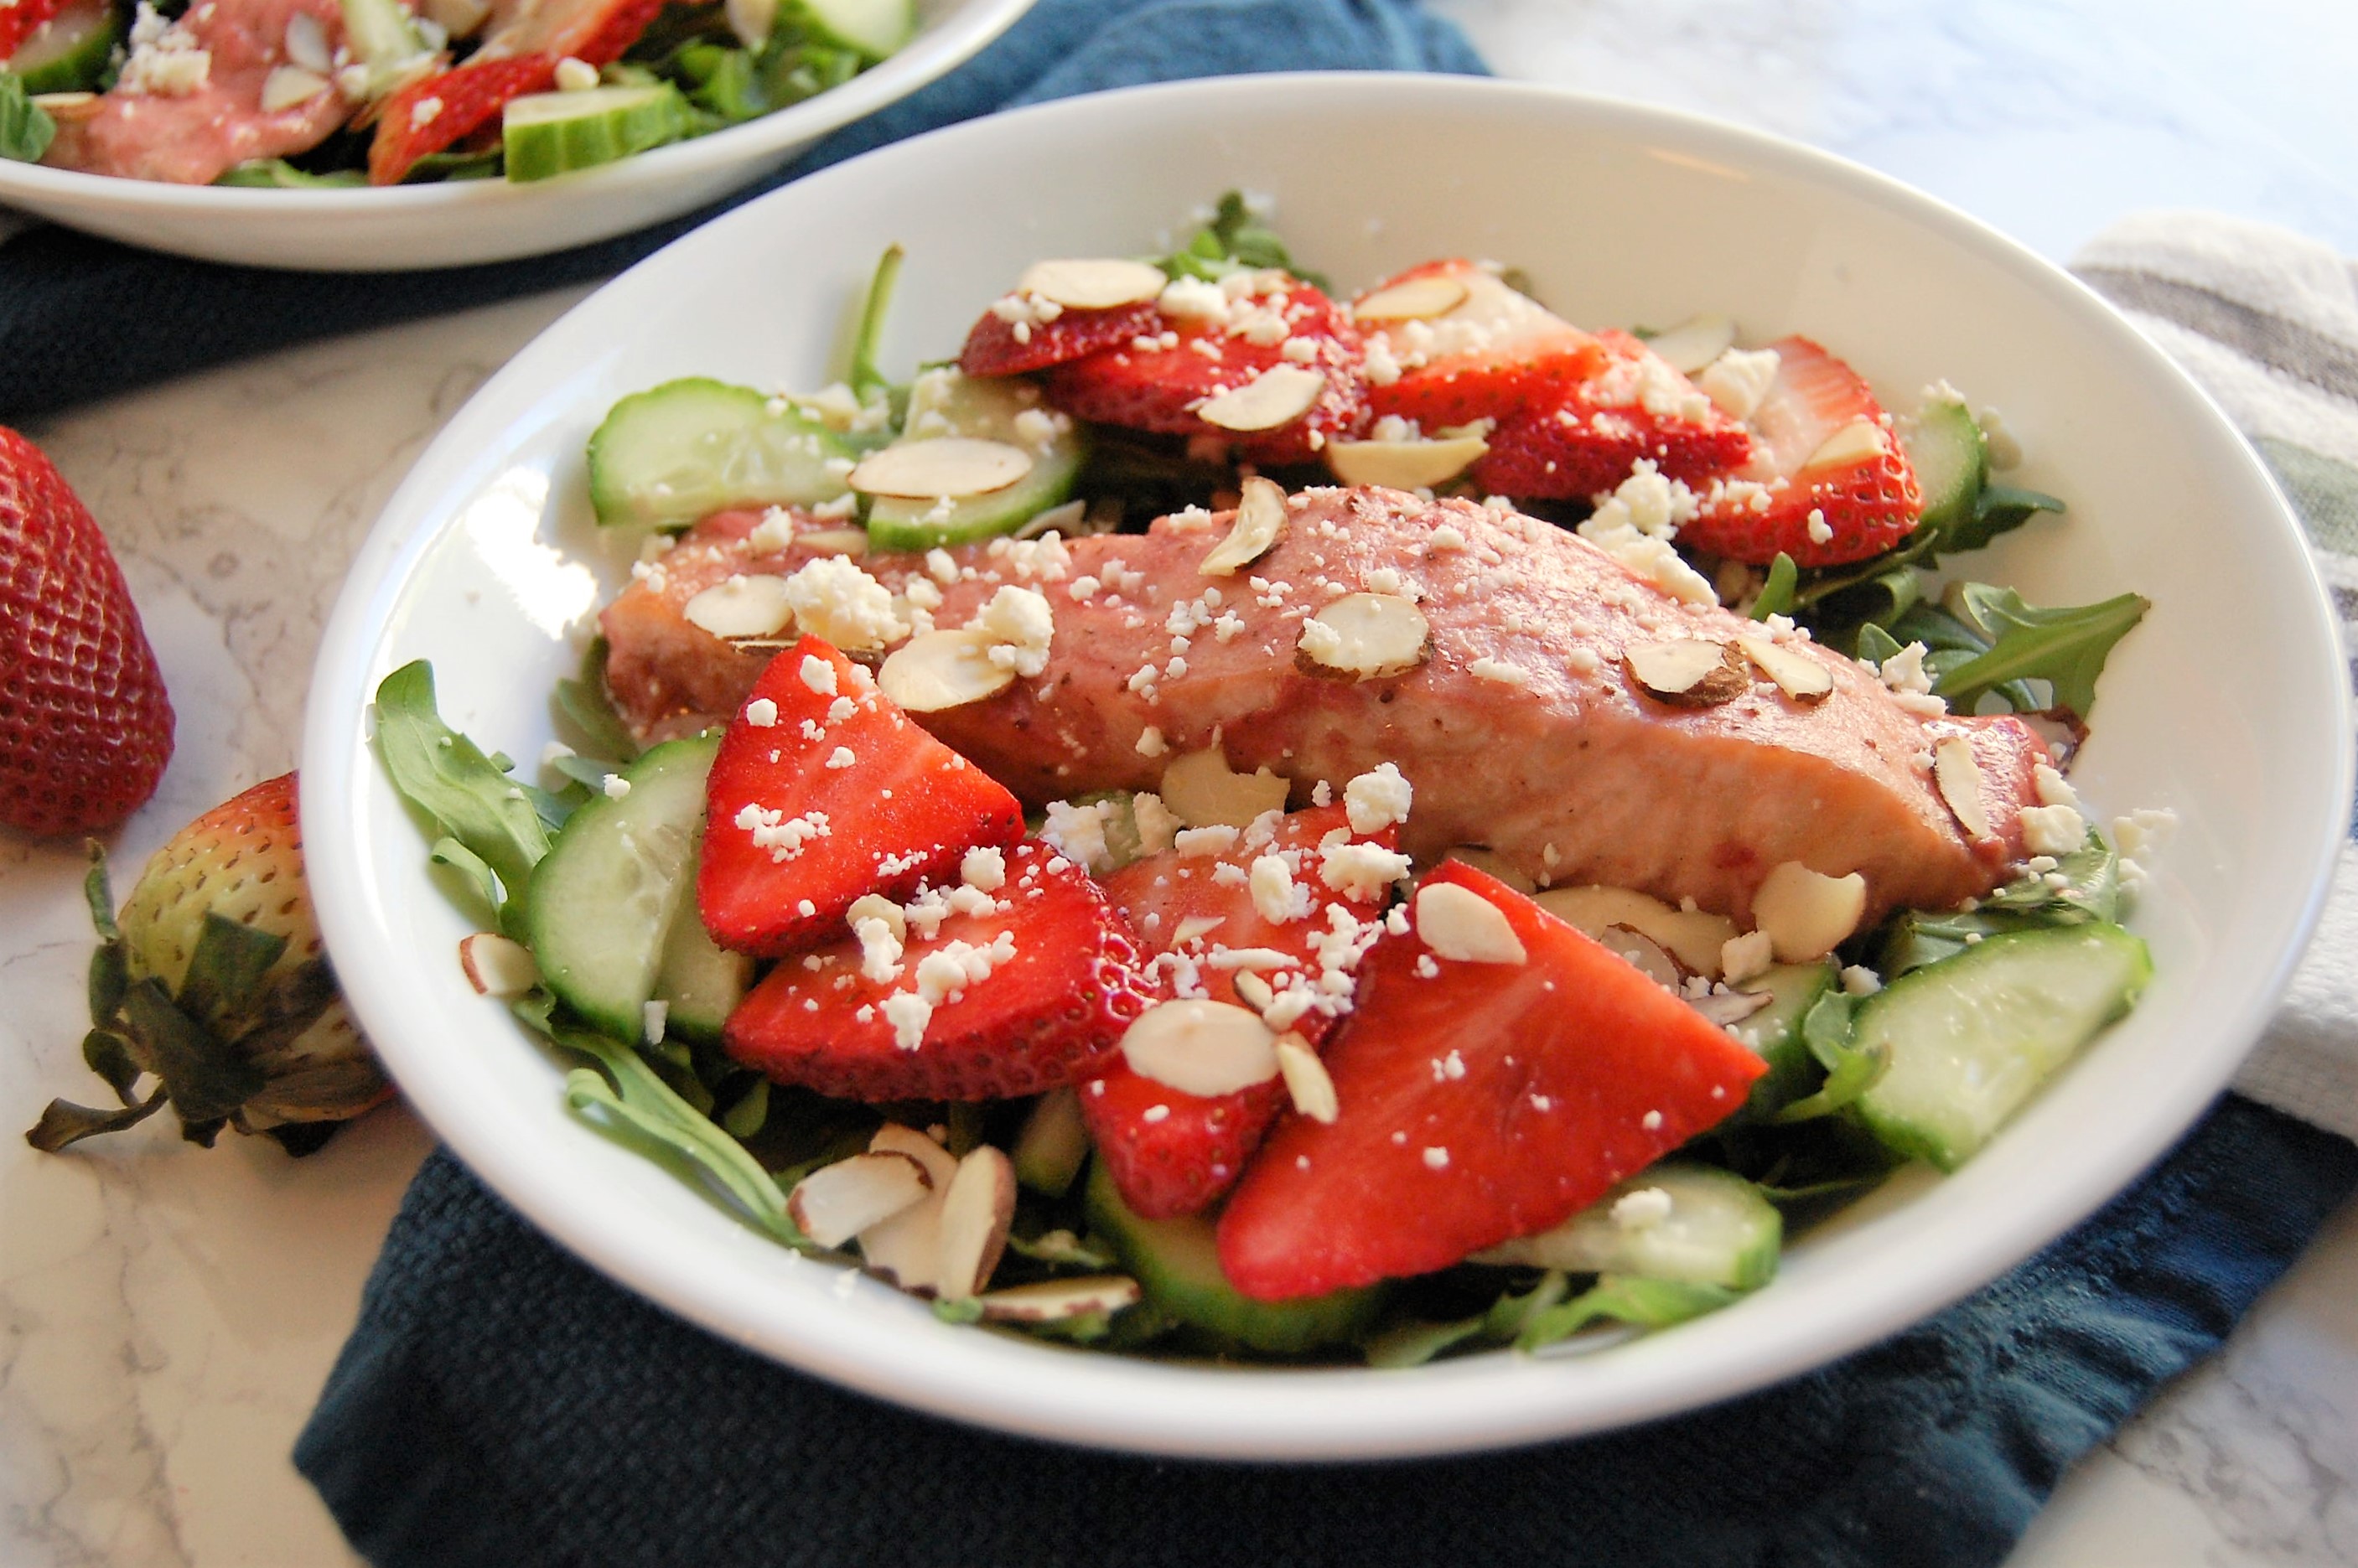 This fresh, springtime salad is a healthy entree salad with salmon baked in strawberry dressing. It has crisp cucumber toppings, sweet strawberries, crunchy almonds, creamy feta, and all served over a bed of spicy arugula. Try this easy, 30 minute dinner! | healthy recipe, salad recipe, salmon salad, strawberry salad, 30 minute meal, 30 minute dinner, pretty food, strawberries, strawberry salmon salad, dietitian recipe, nutritious recipe, healthy recipe |